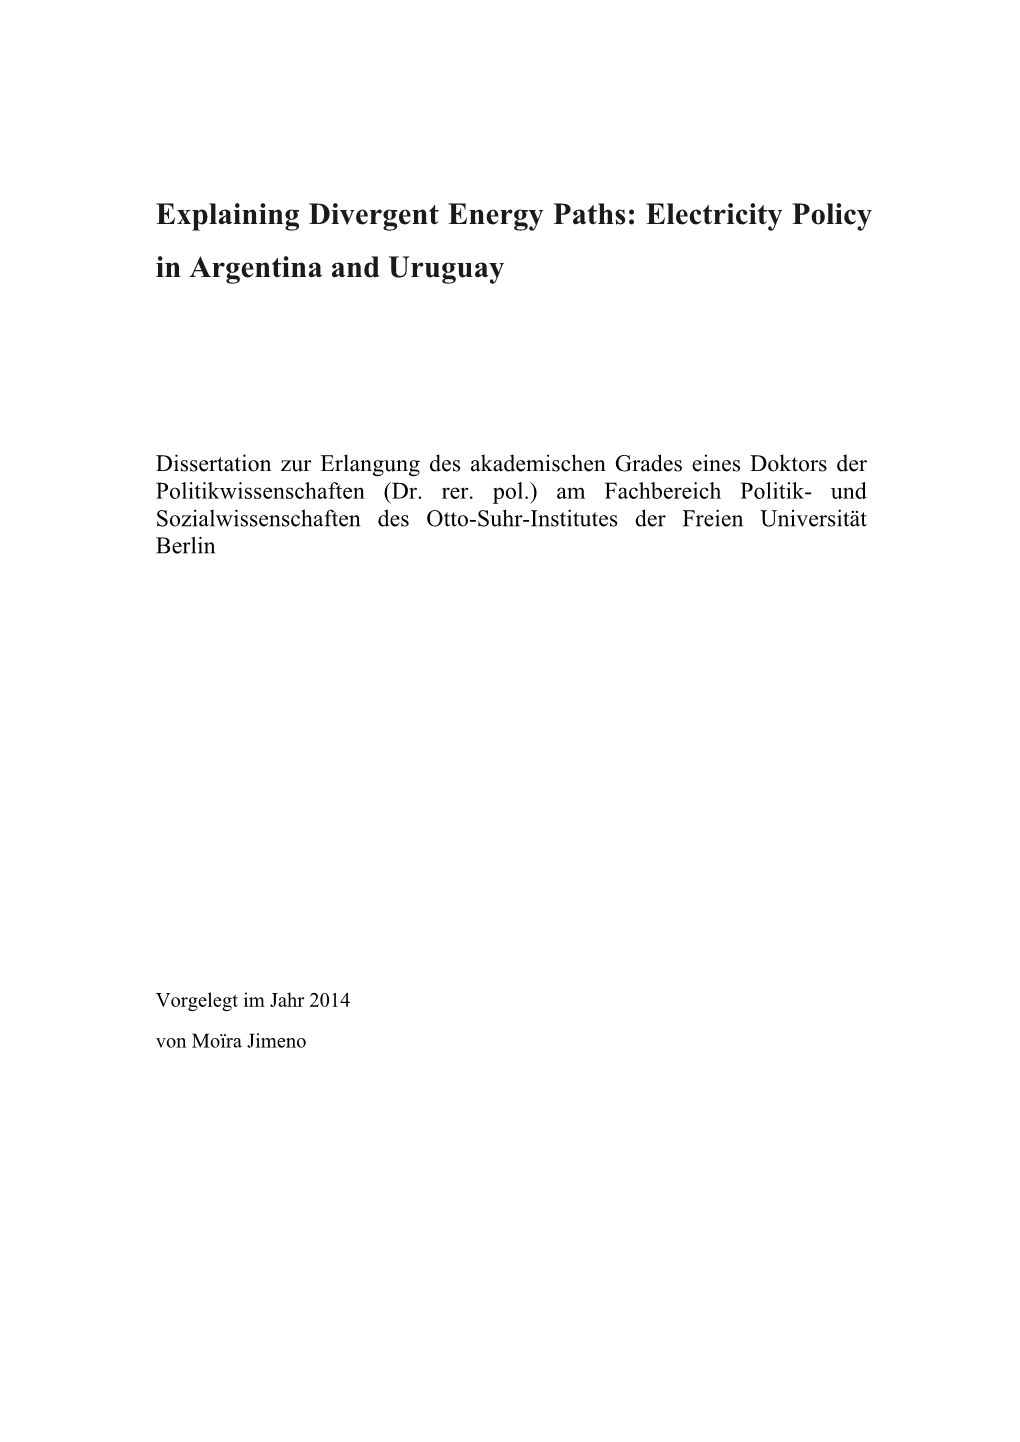 Electricity Policy in Argentina and Uruguay